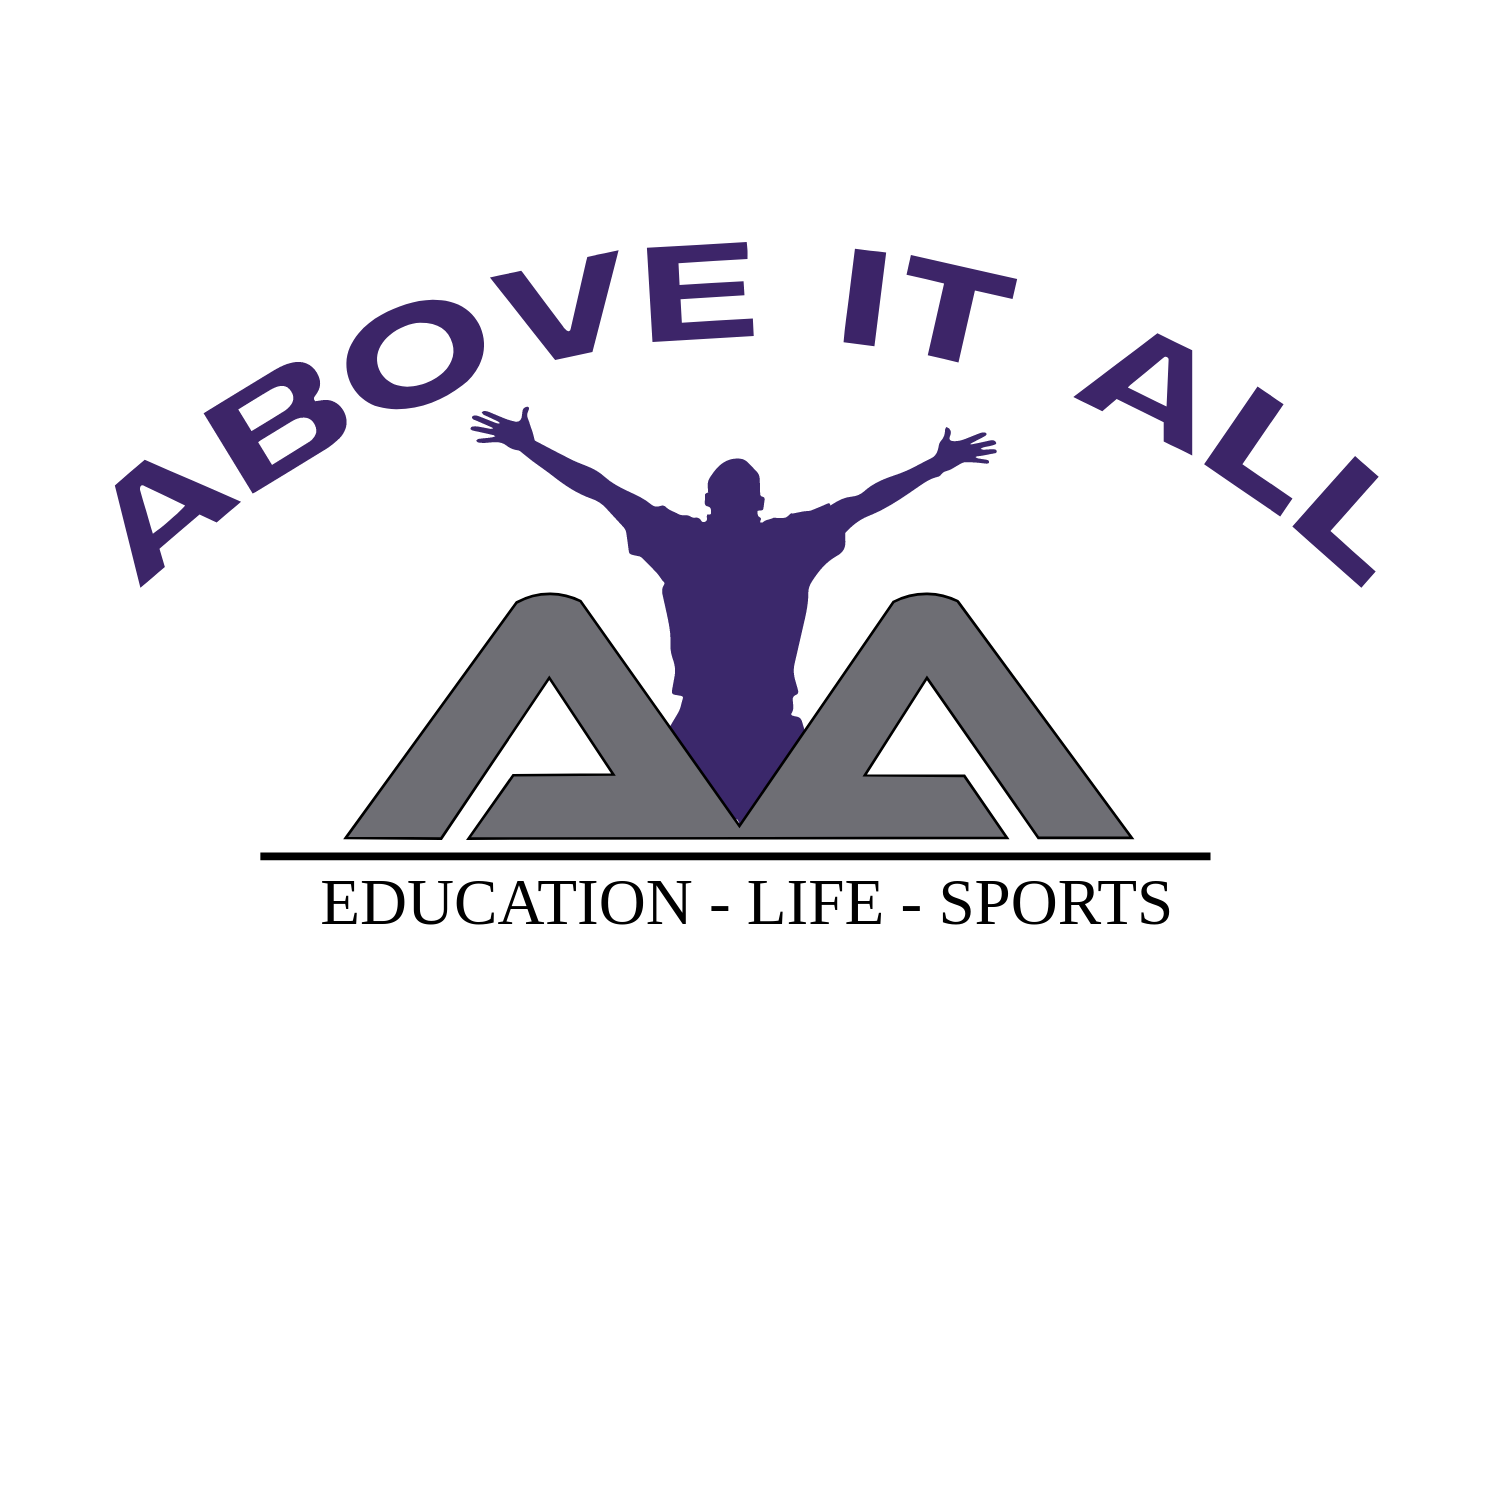 Above It All Mentoring Inc.